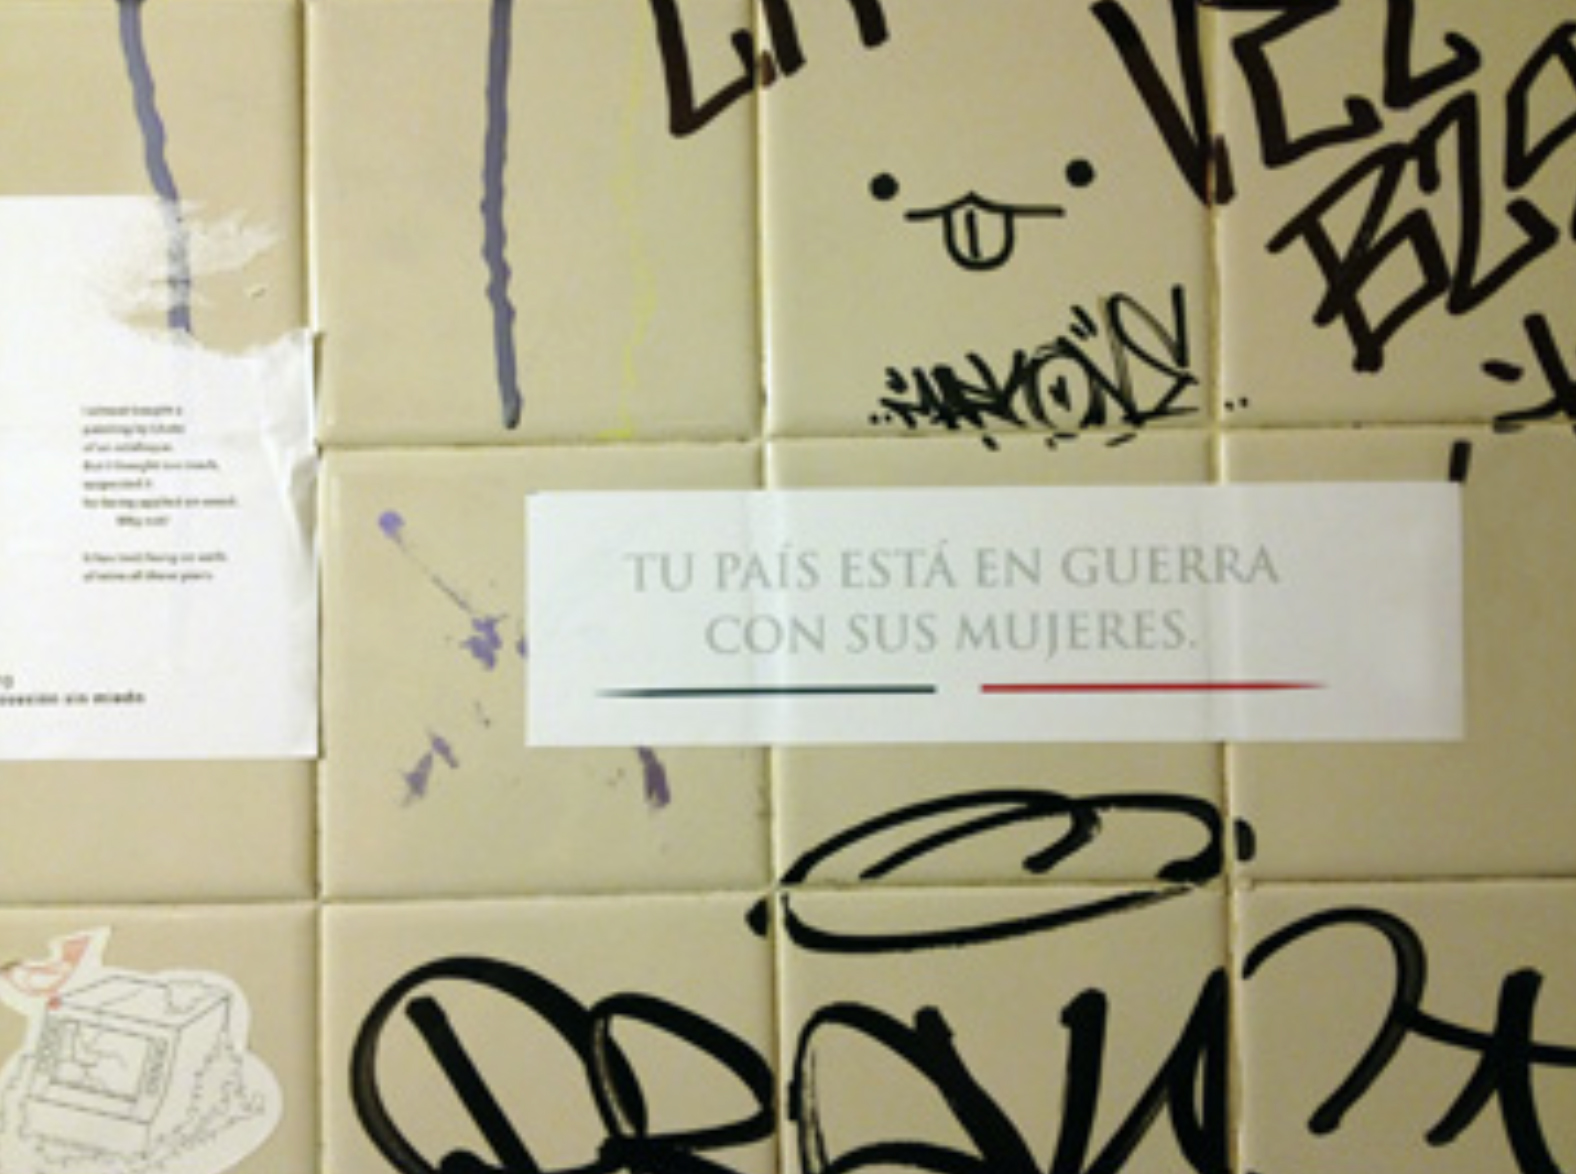 Detail of wall tiled with off-white square tiles, which has been covered with black graffiti, stickers, and a message reading "Tu País Esta en Guerra / Con Sus Mujeres"